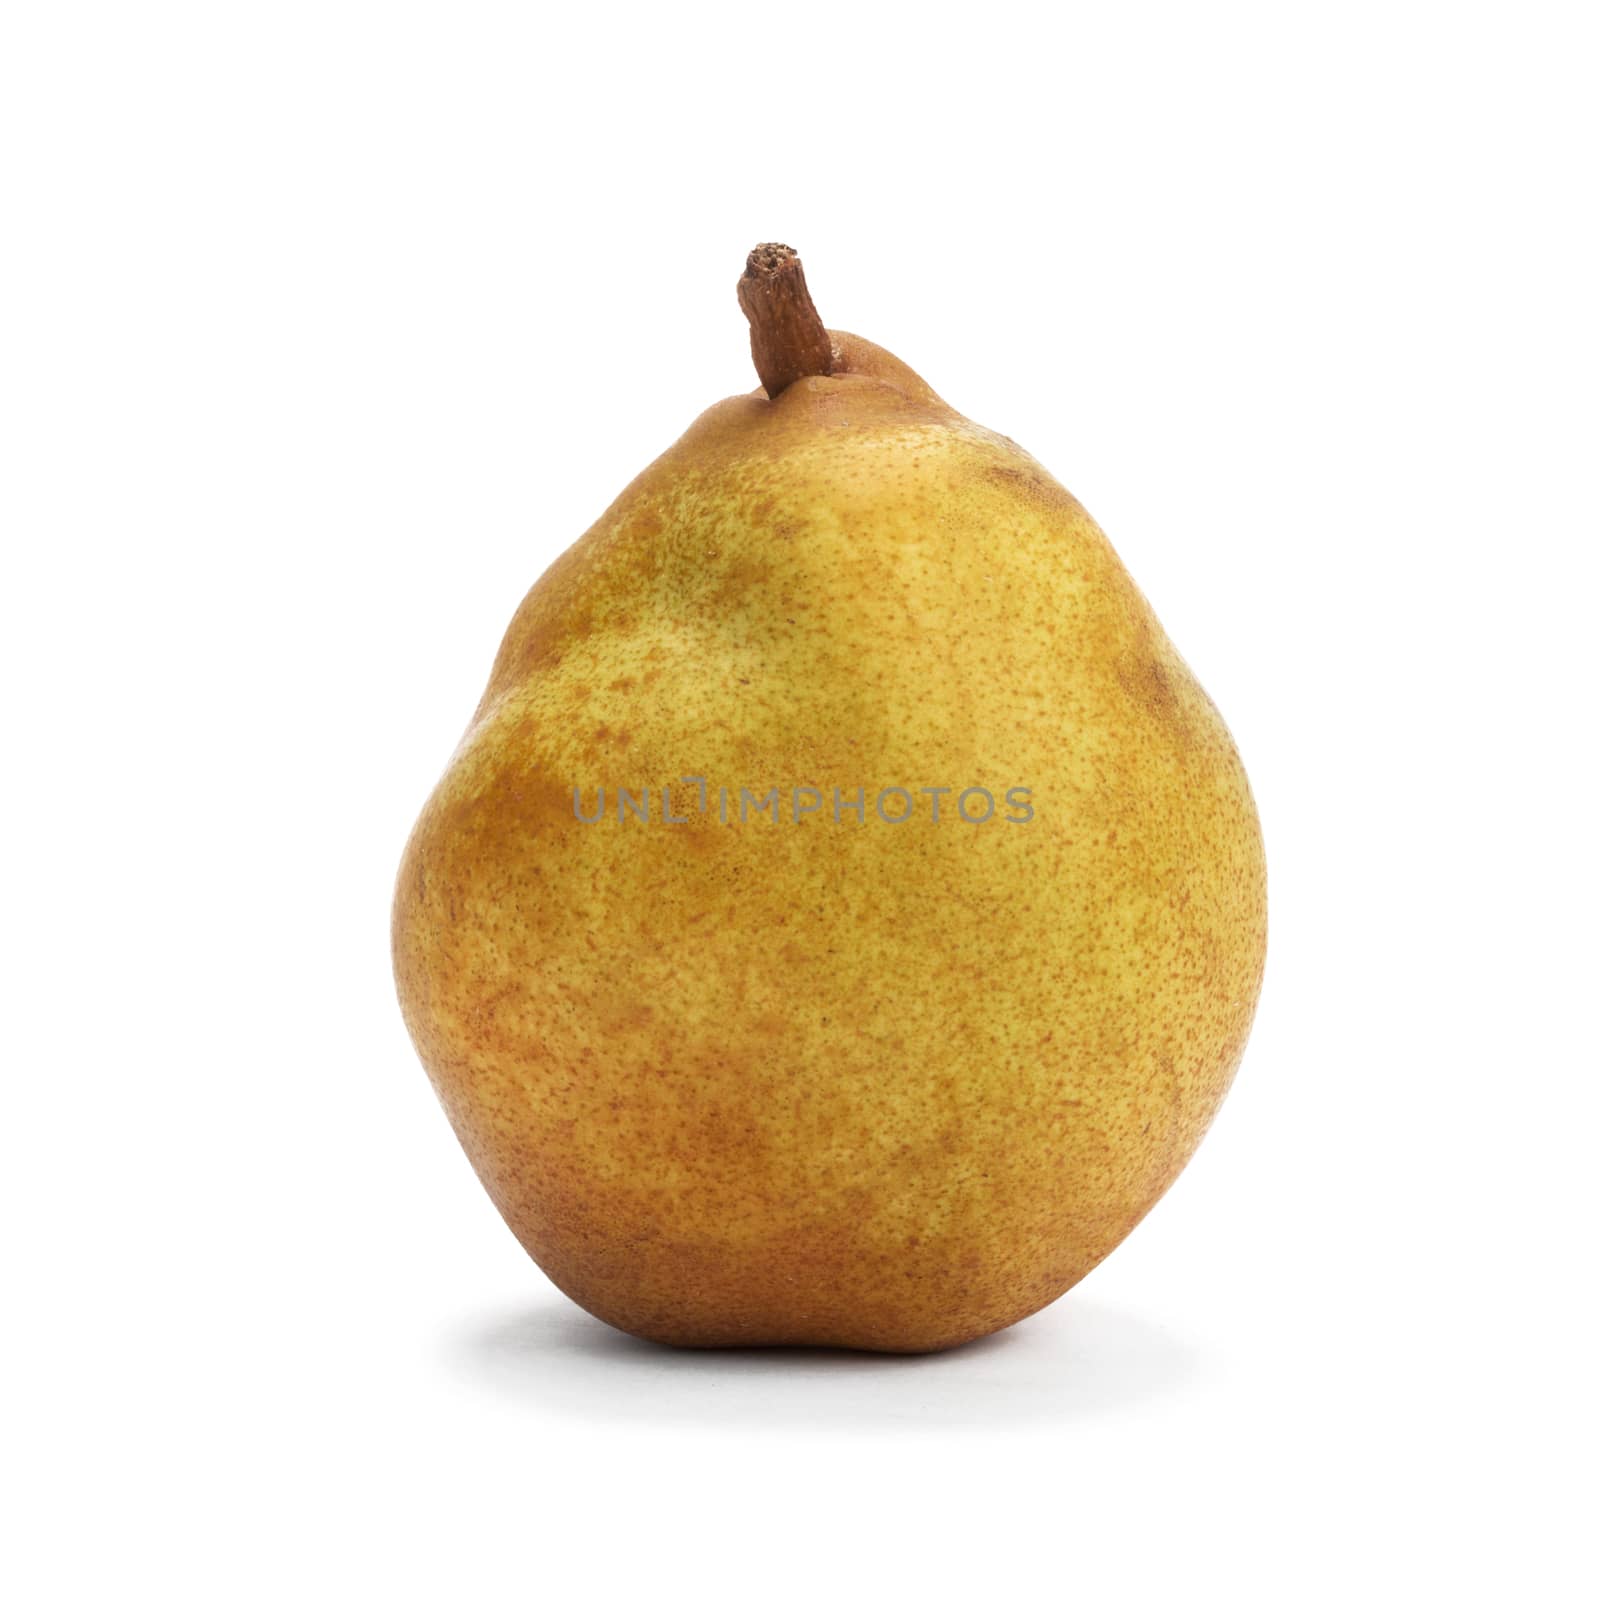 pears one on white background, isolated on white